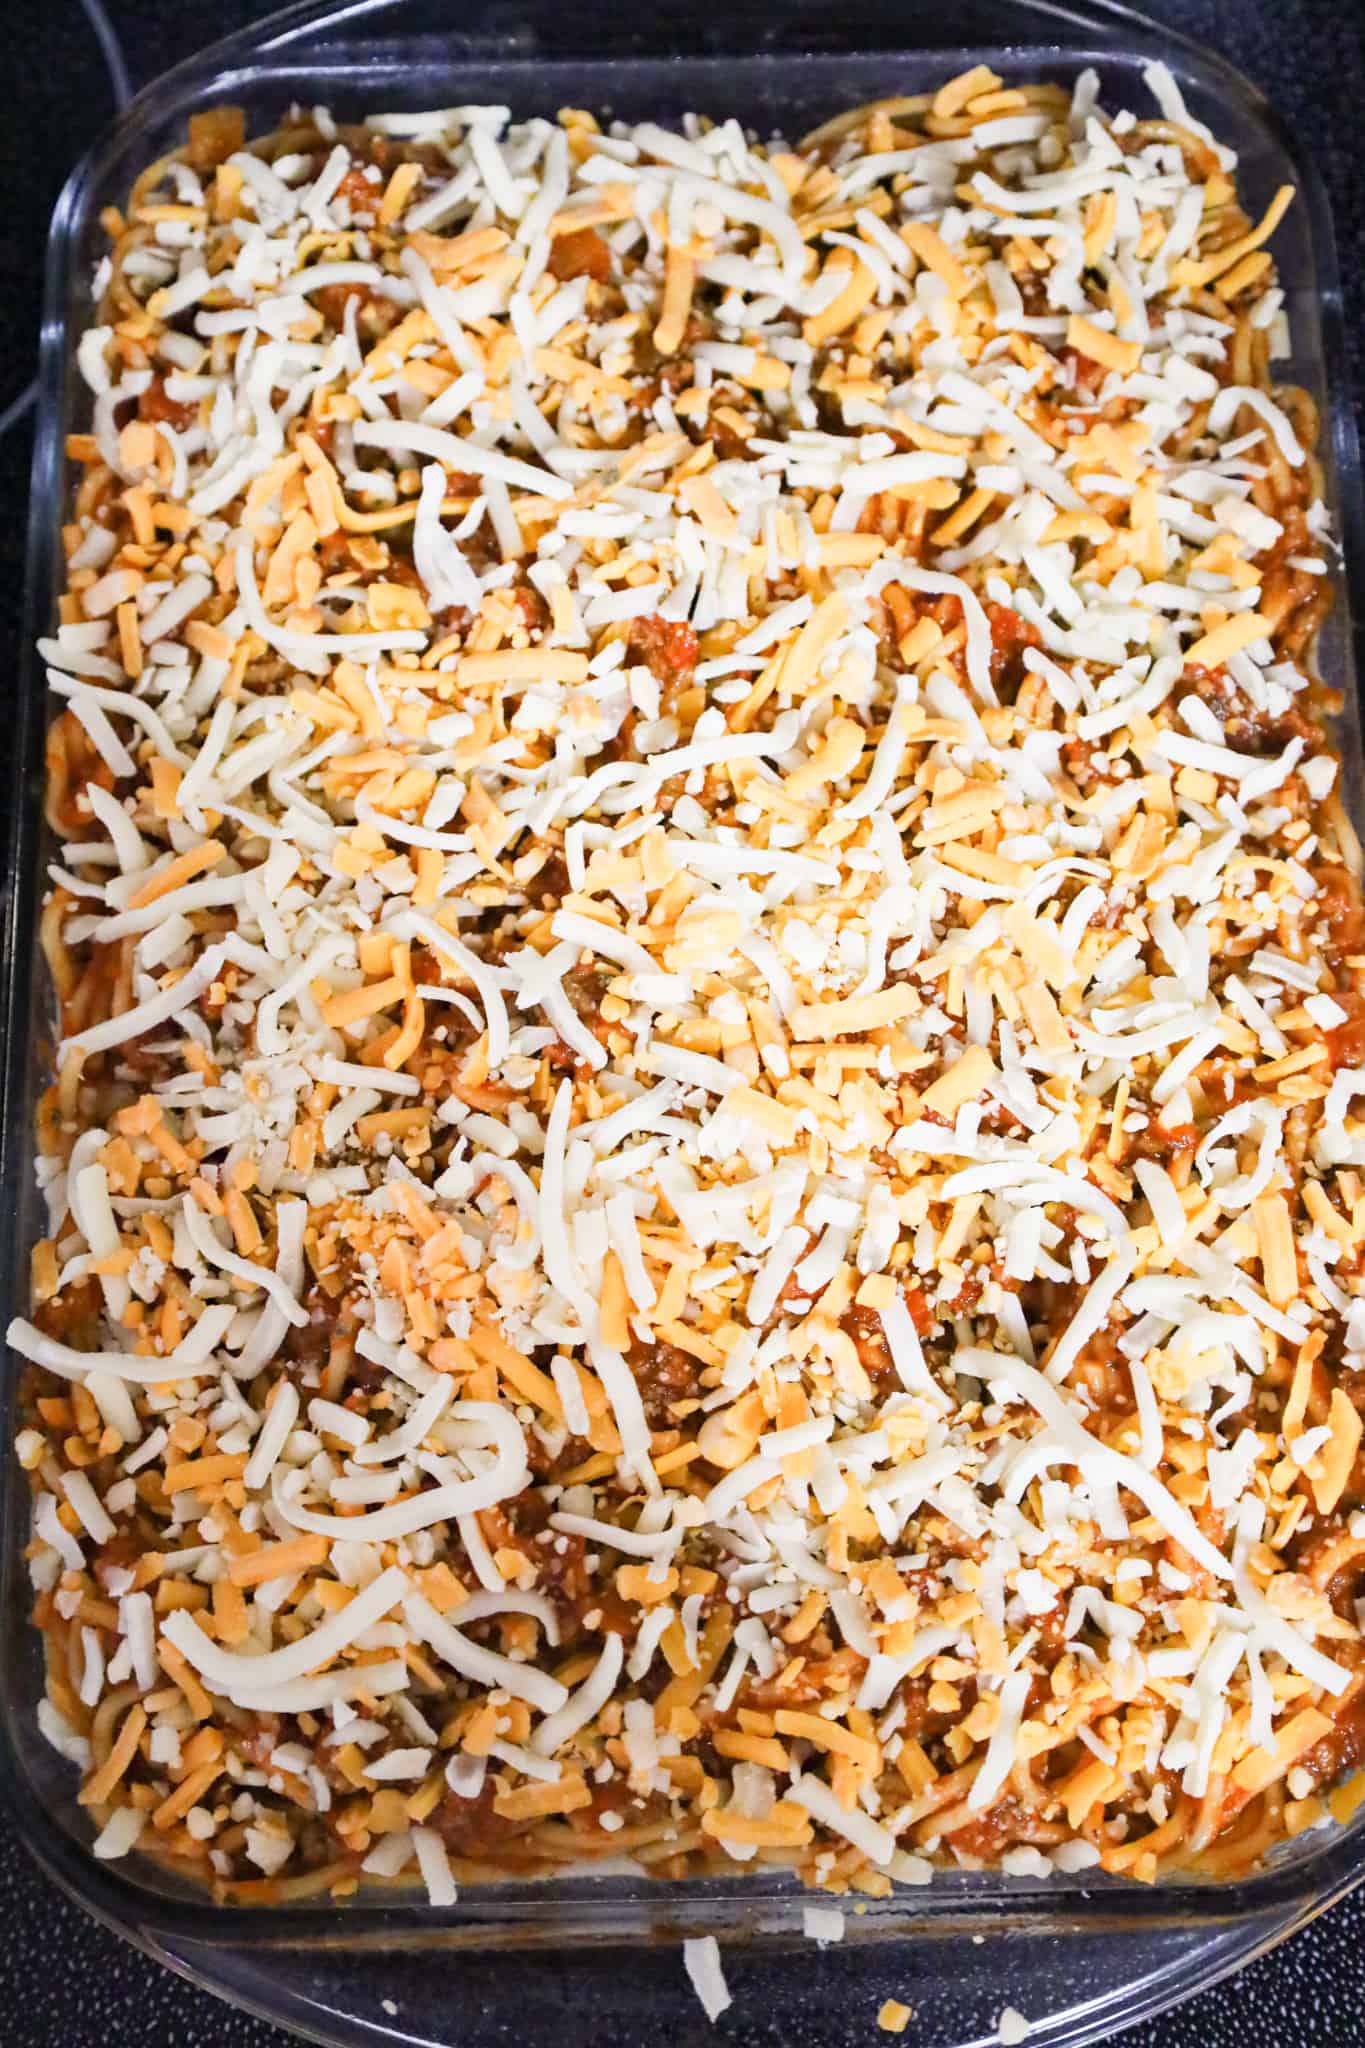 shredded mozzarella and cheddar cheese on top of spaghetti in a baking dish